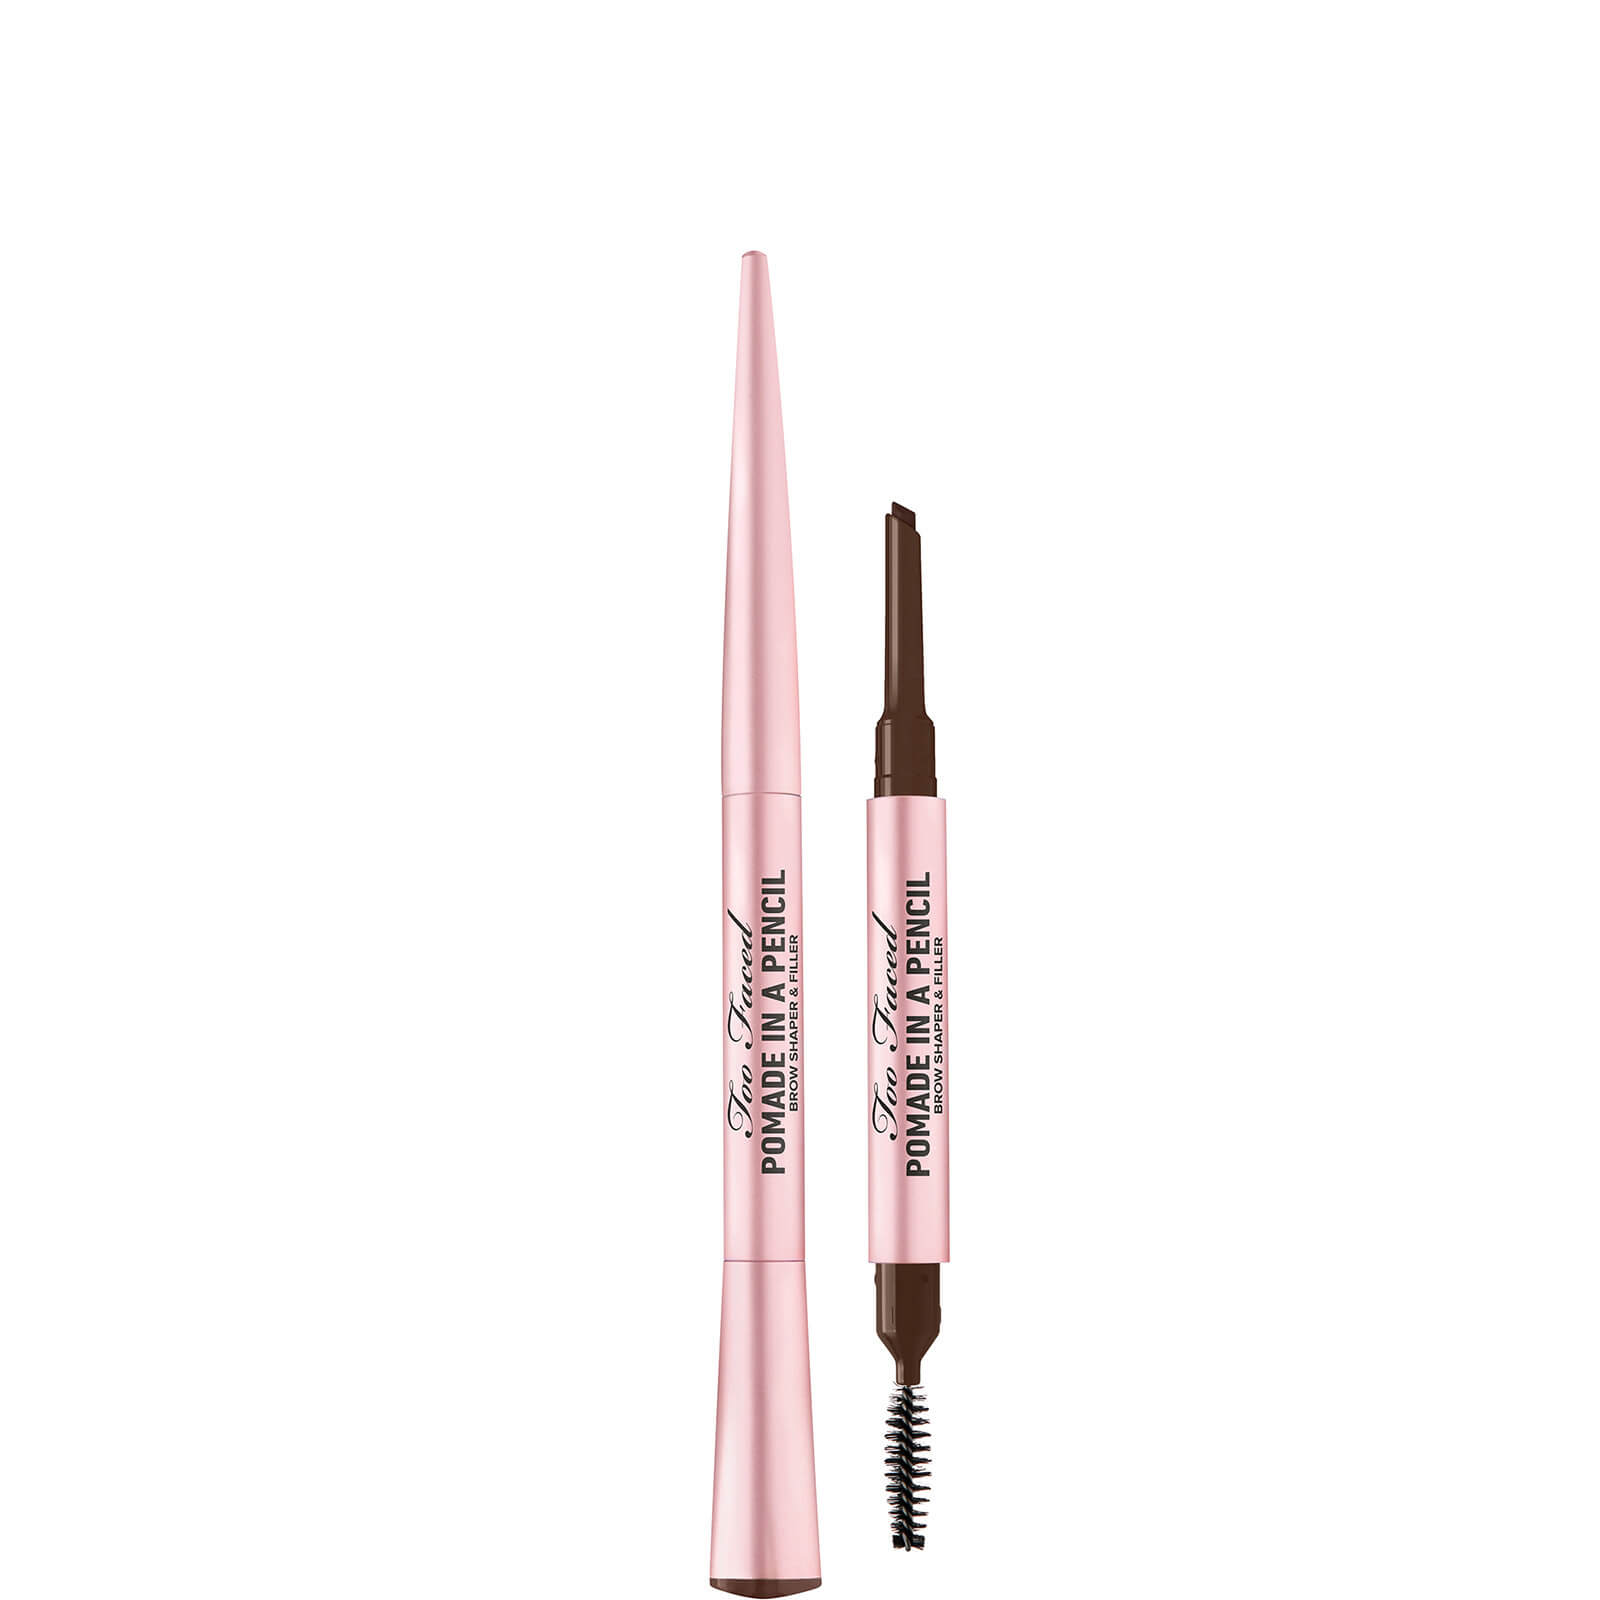 Brow Pomade in a Pencil Too Faced 0,19g (Various Shades) - Espresso